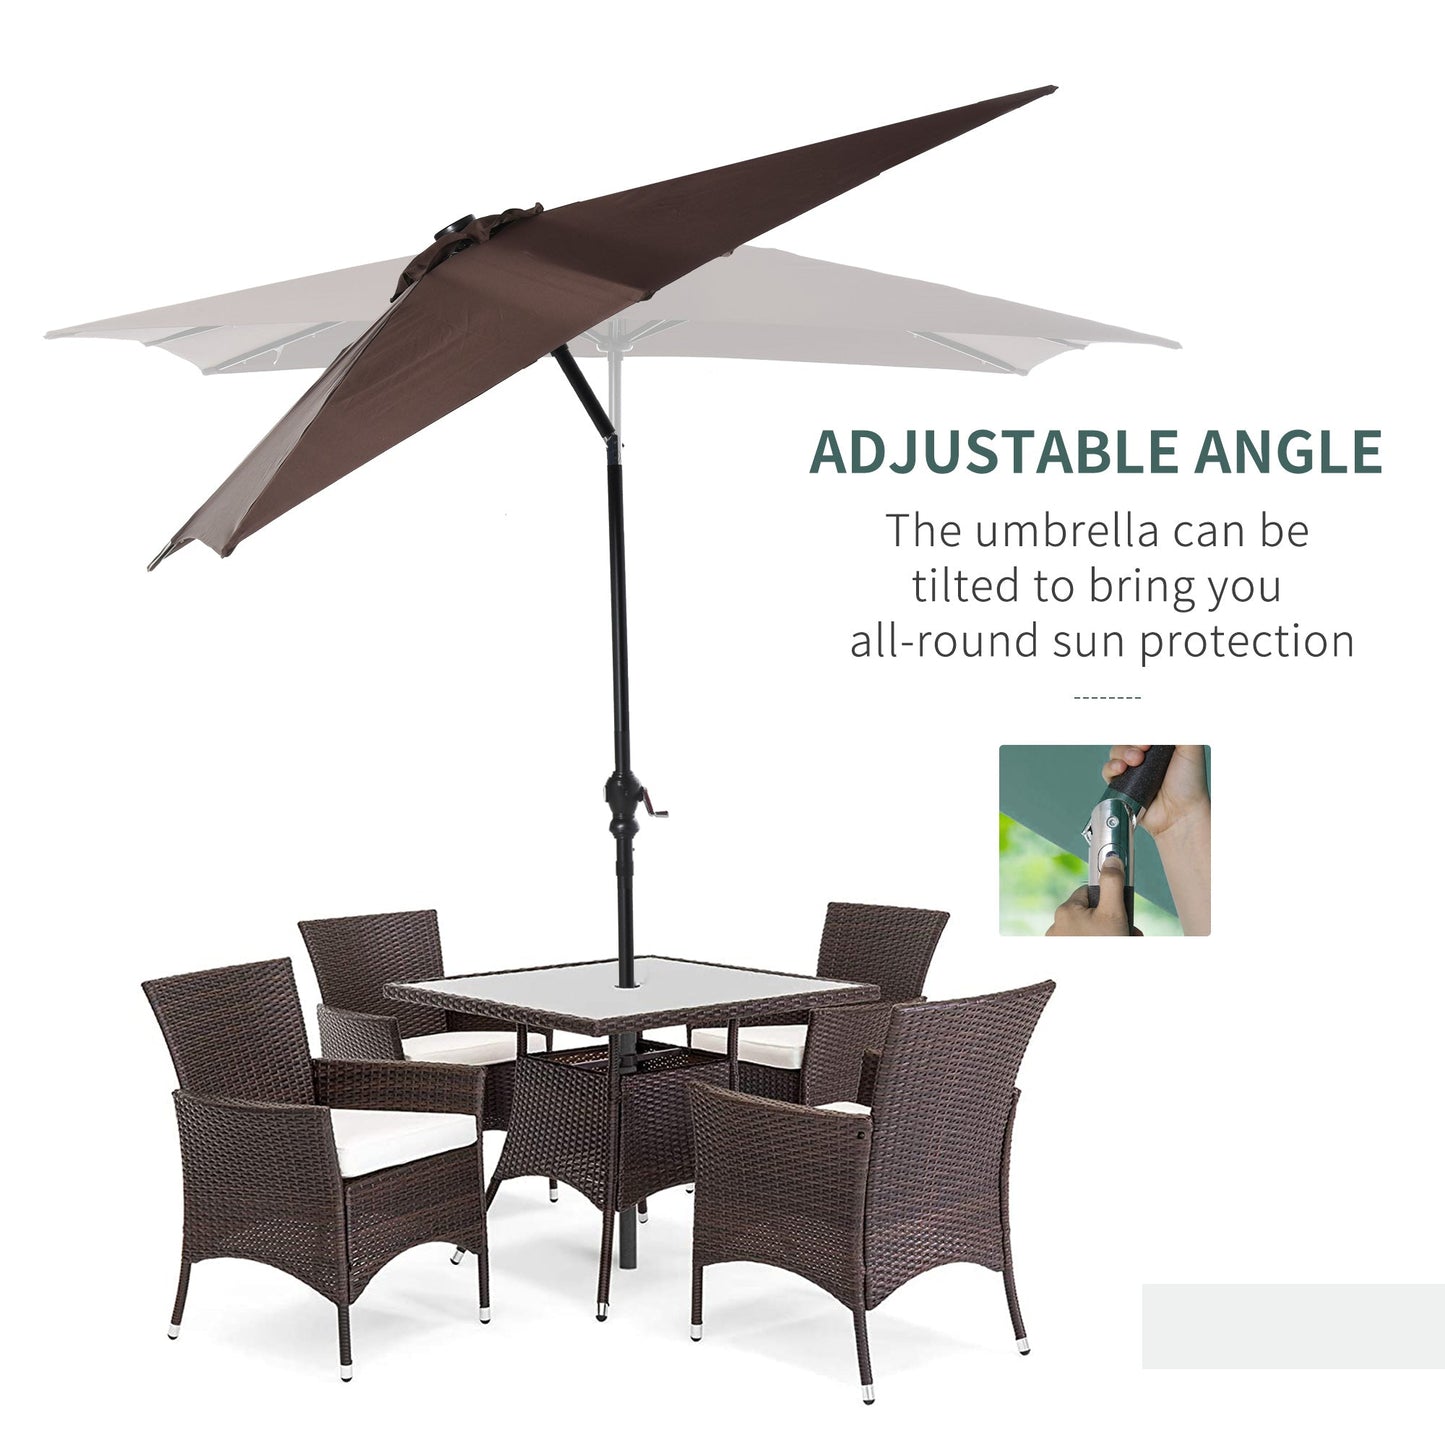 Outdoor and Garden-9' x 7' Patio Umbrella Outdoor Table Market Umbrella with Crank, Solar LED Lights, 45° Tilt, Push-Button Operation, for Deck, Pool, Brown - Outdoor Style Company